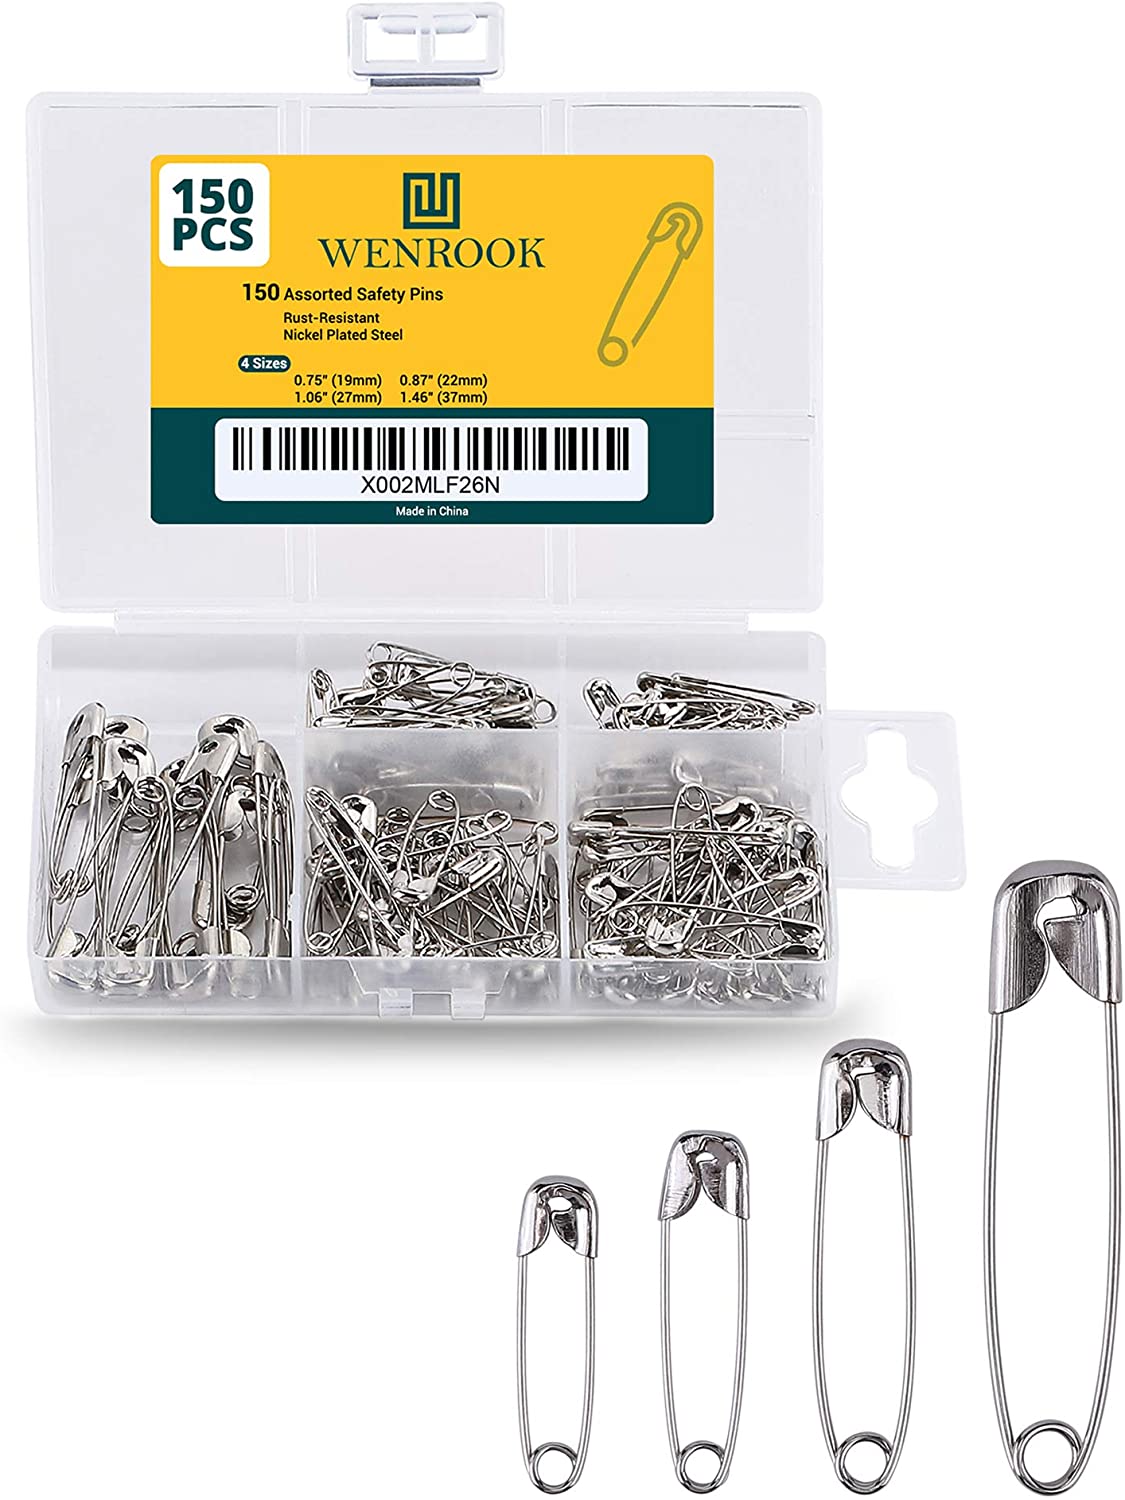 NiftyPlaza Extra Large Safety Pins, 2 Inch 100 Pack